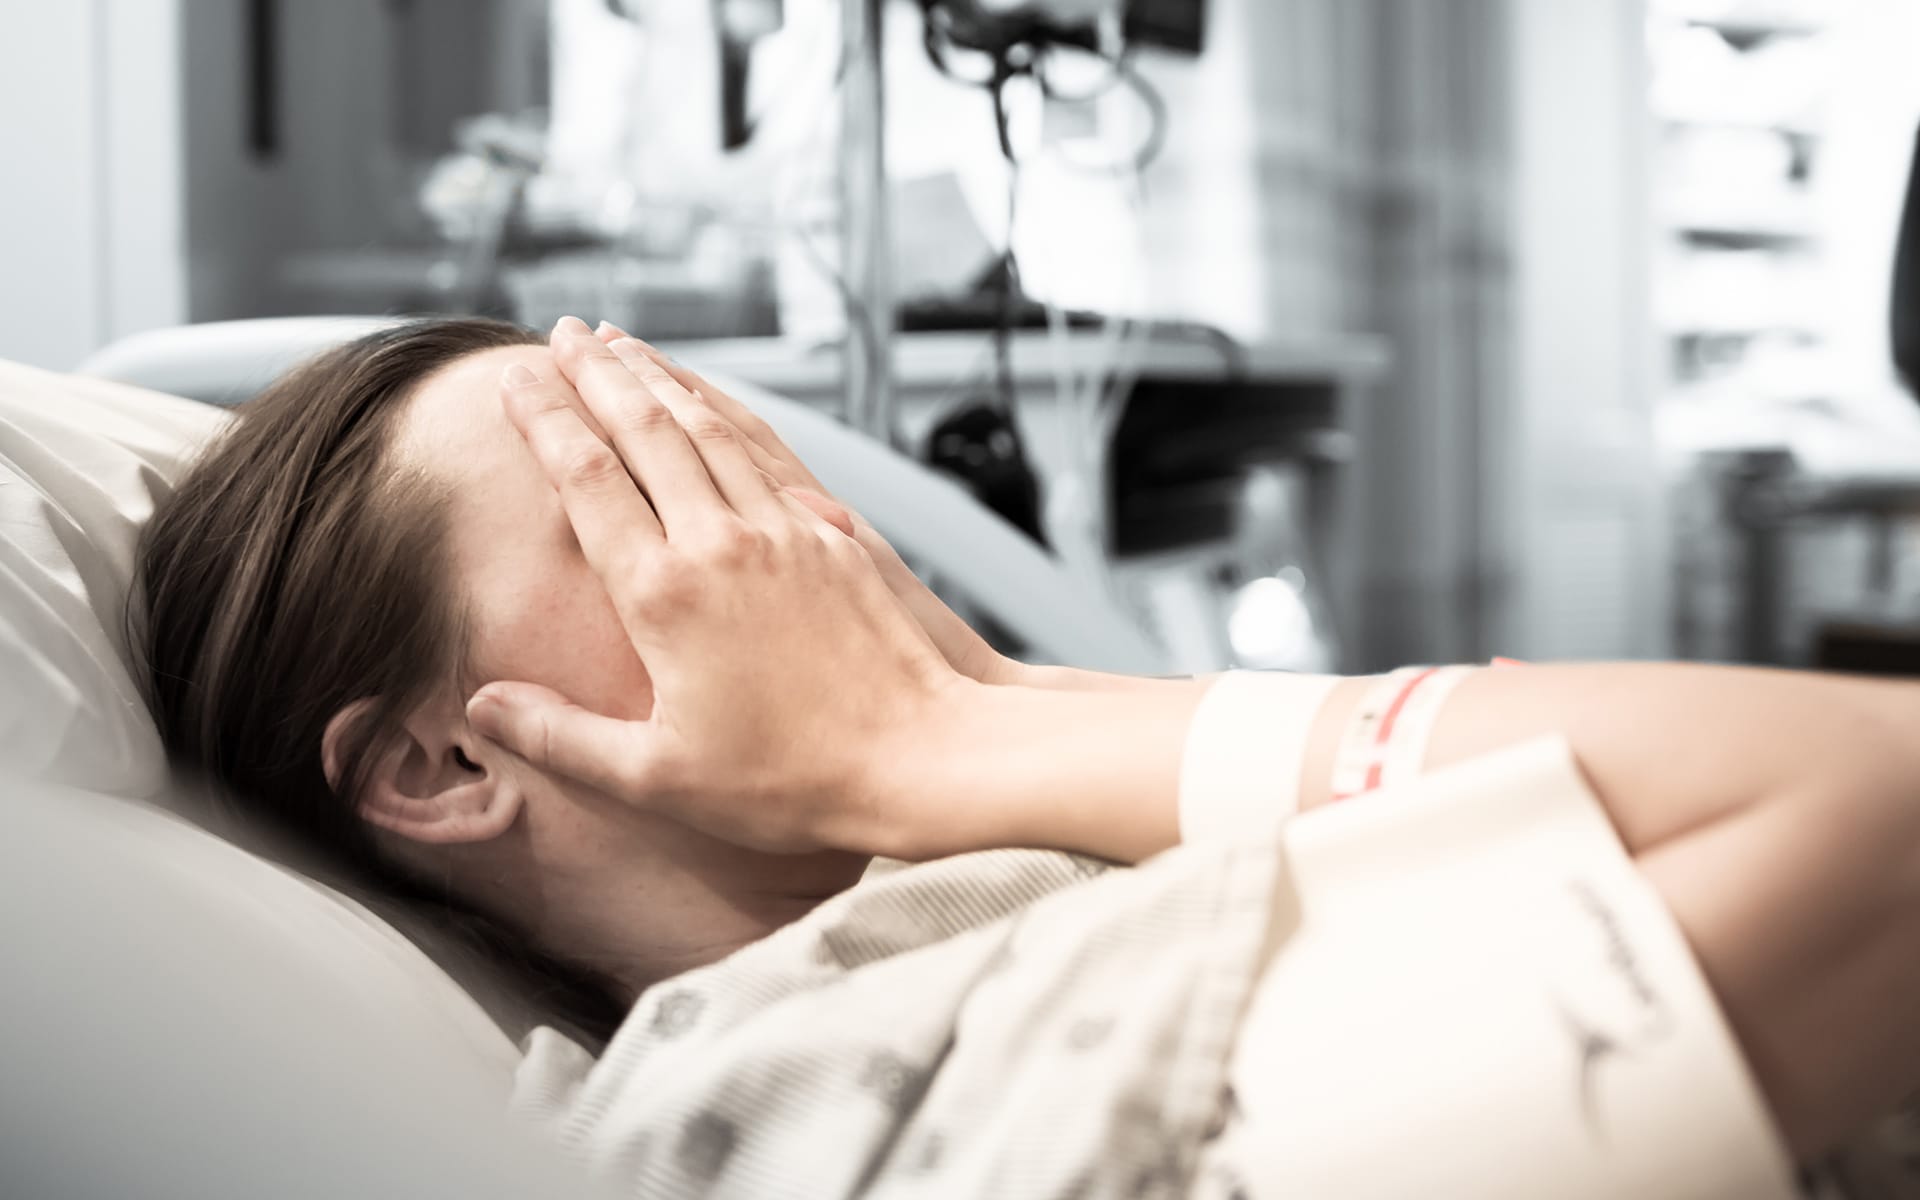 Umgang mit Angst: Patientin hat Angst